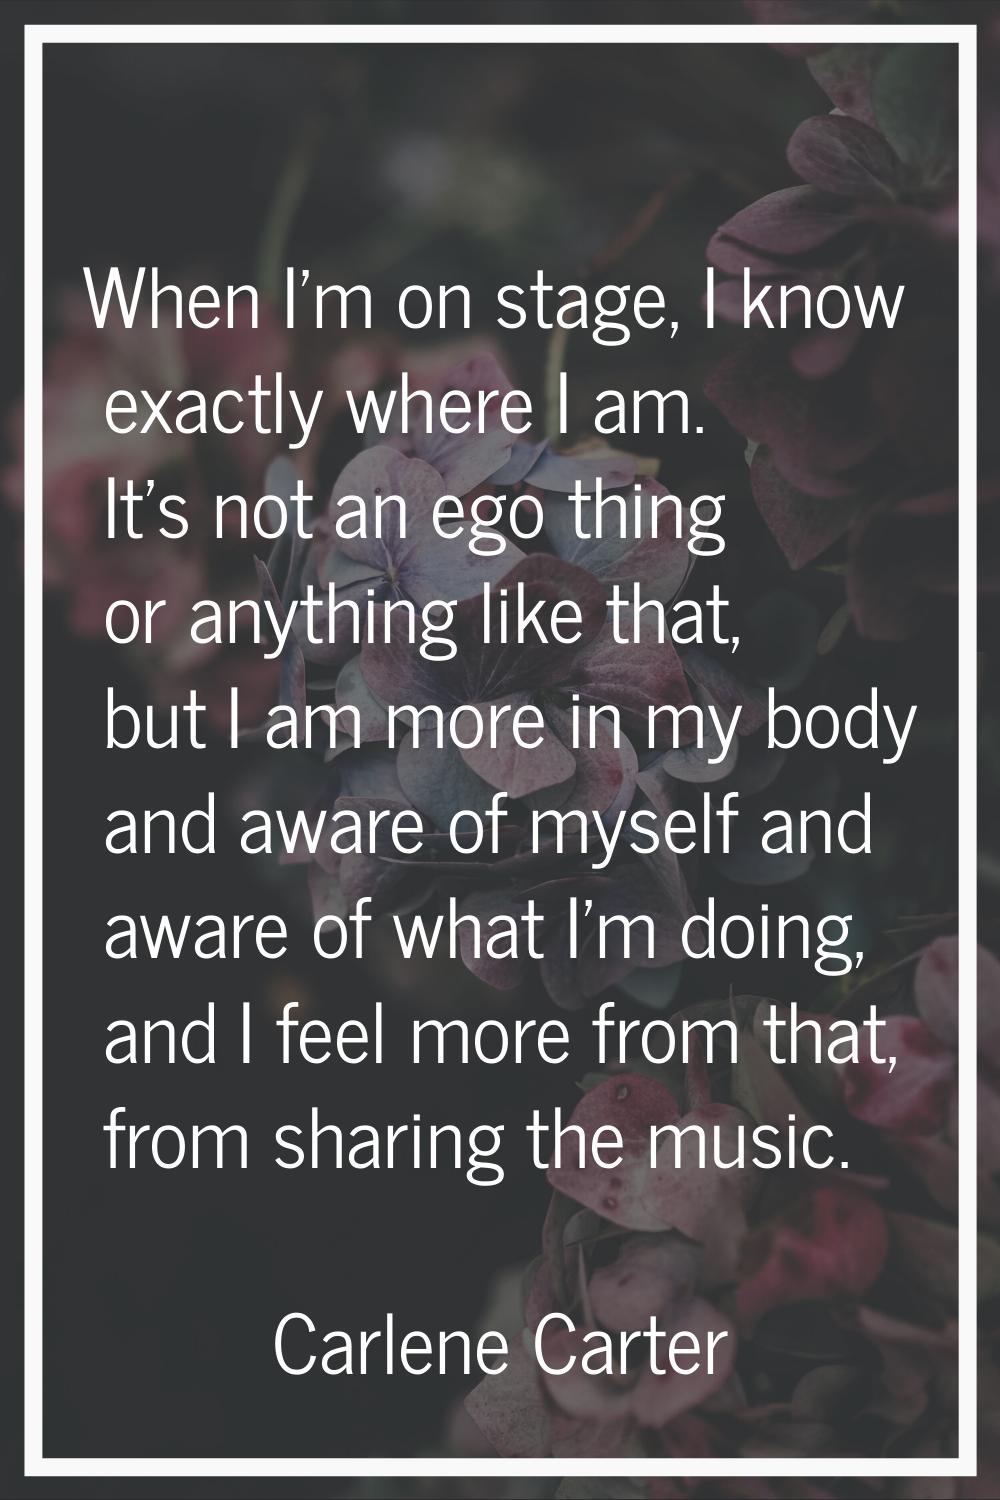 When I'm on stage, I know exactly where I am. It's not an ego thing or anything like that, but I am